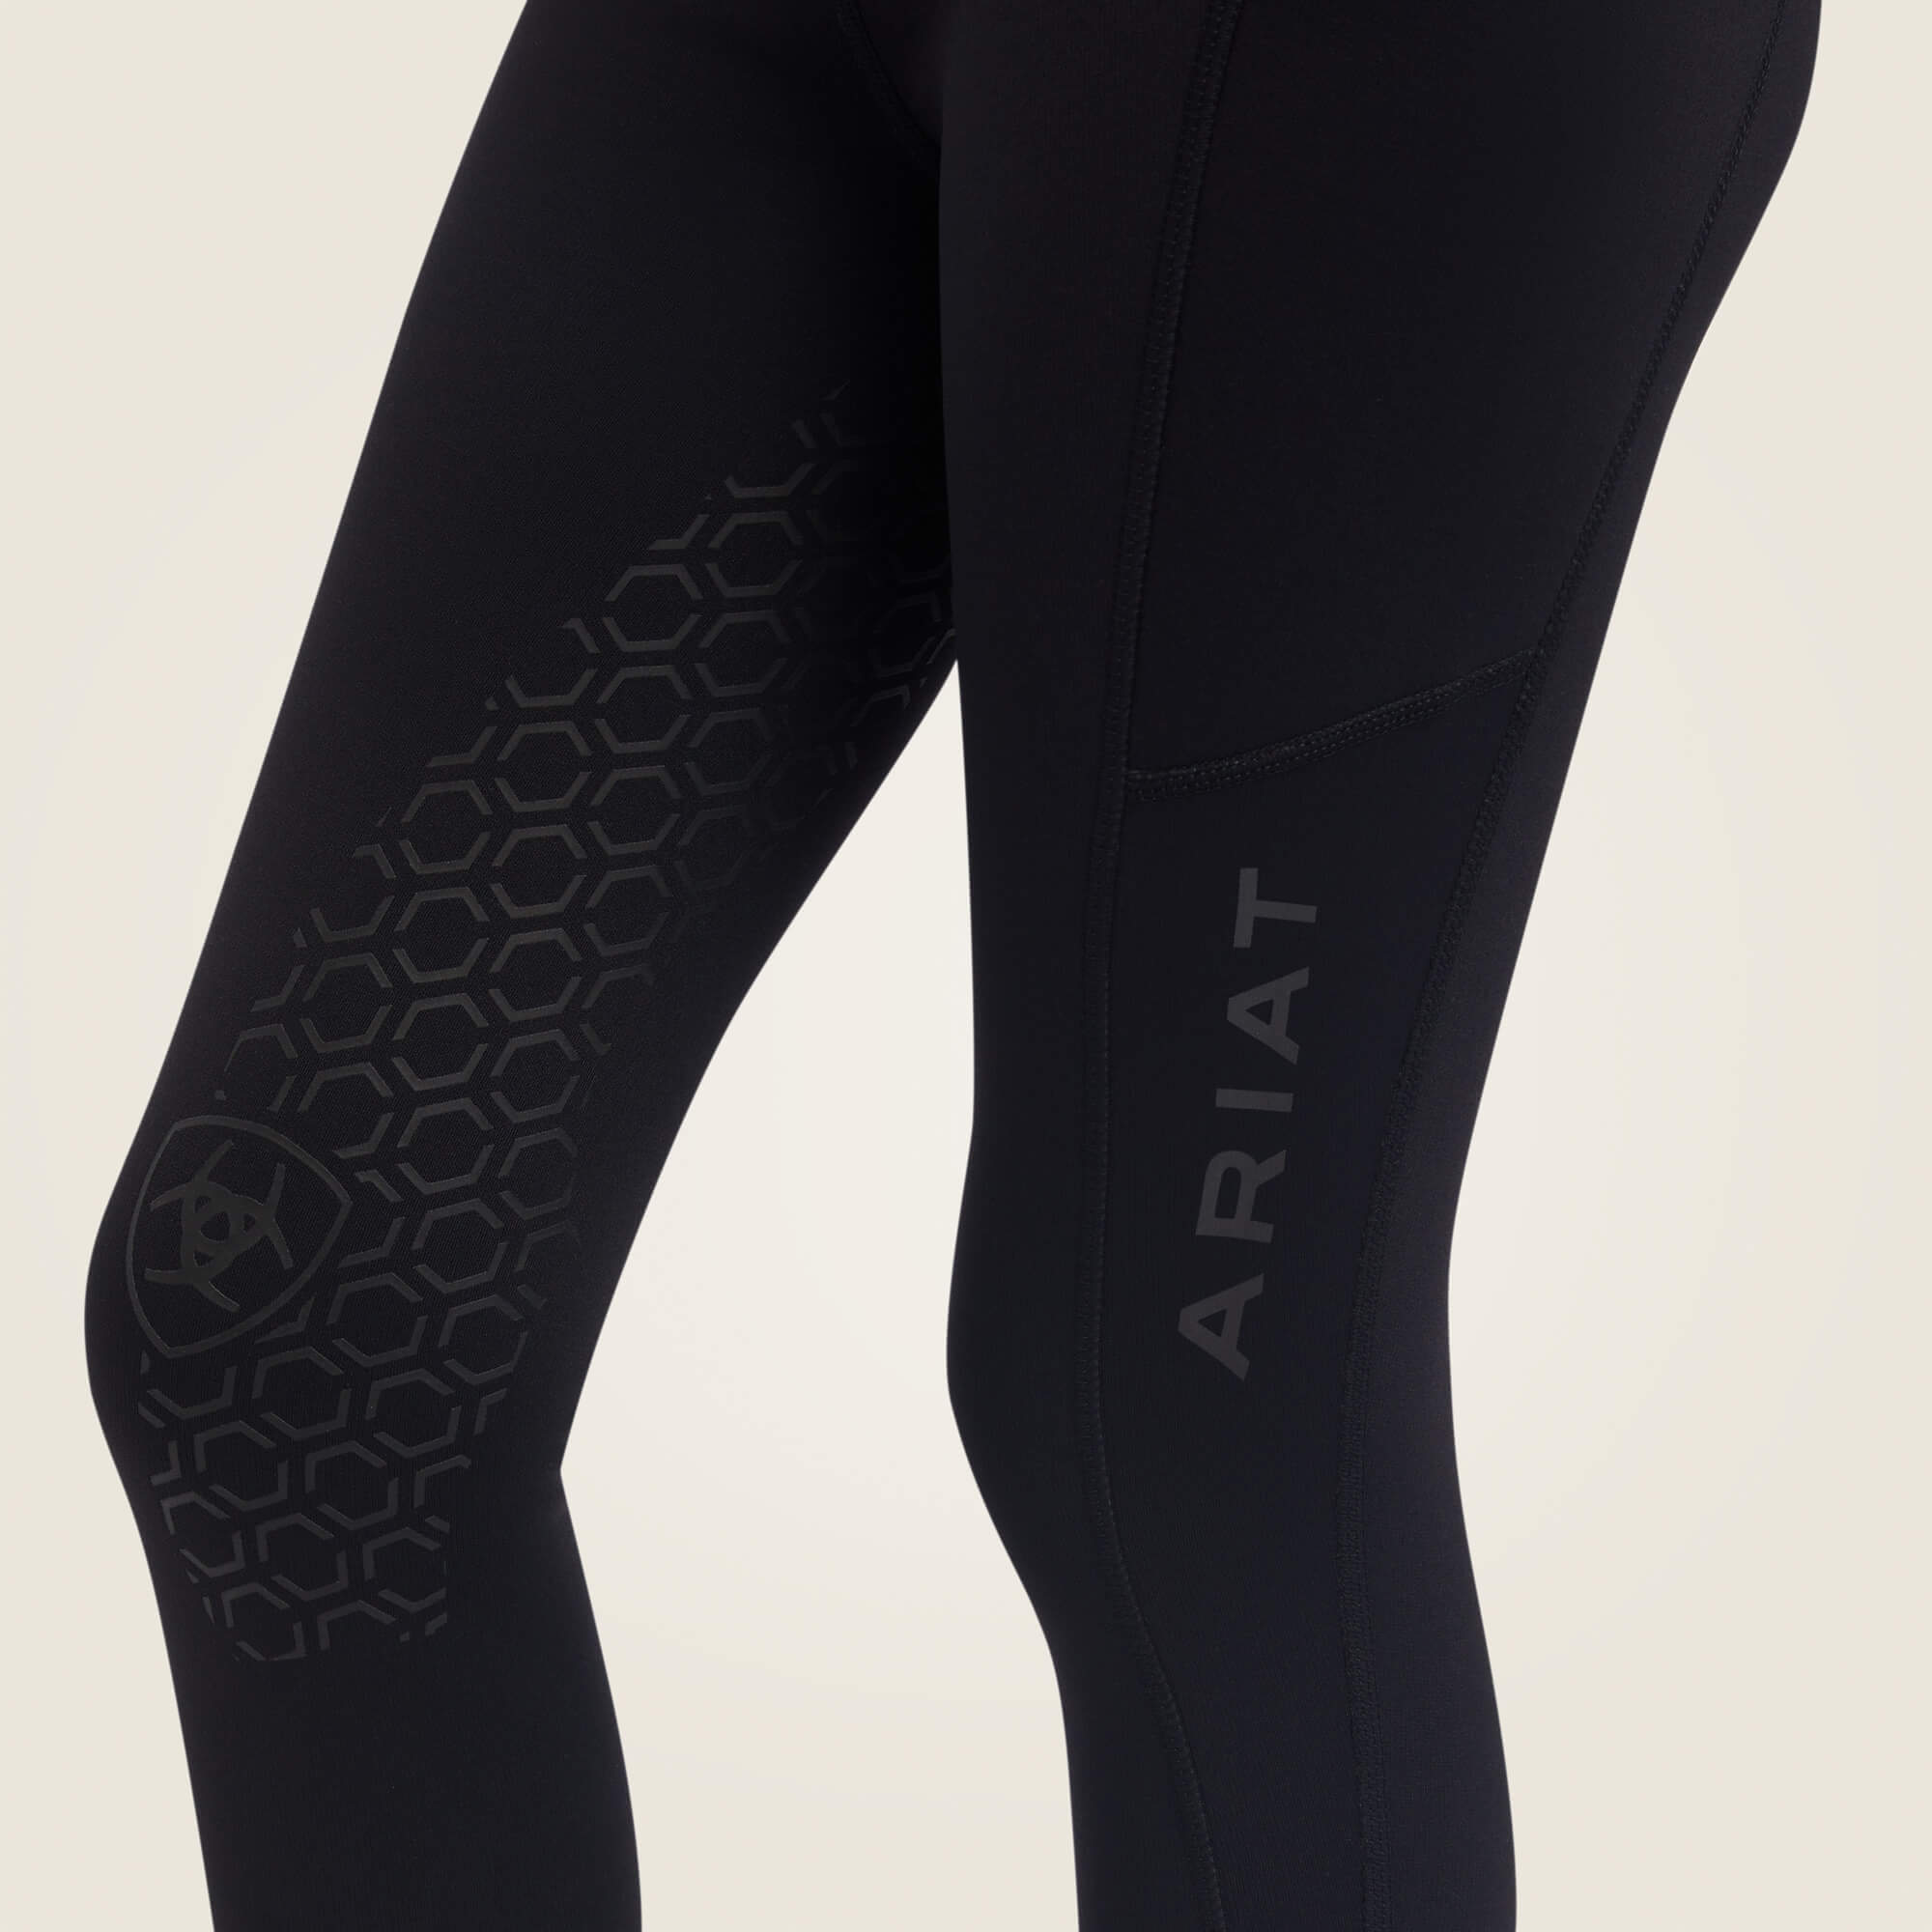 Ariat Youth Venture Thermal Half Grip Tights